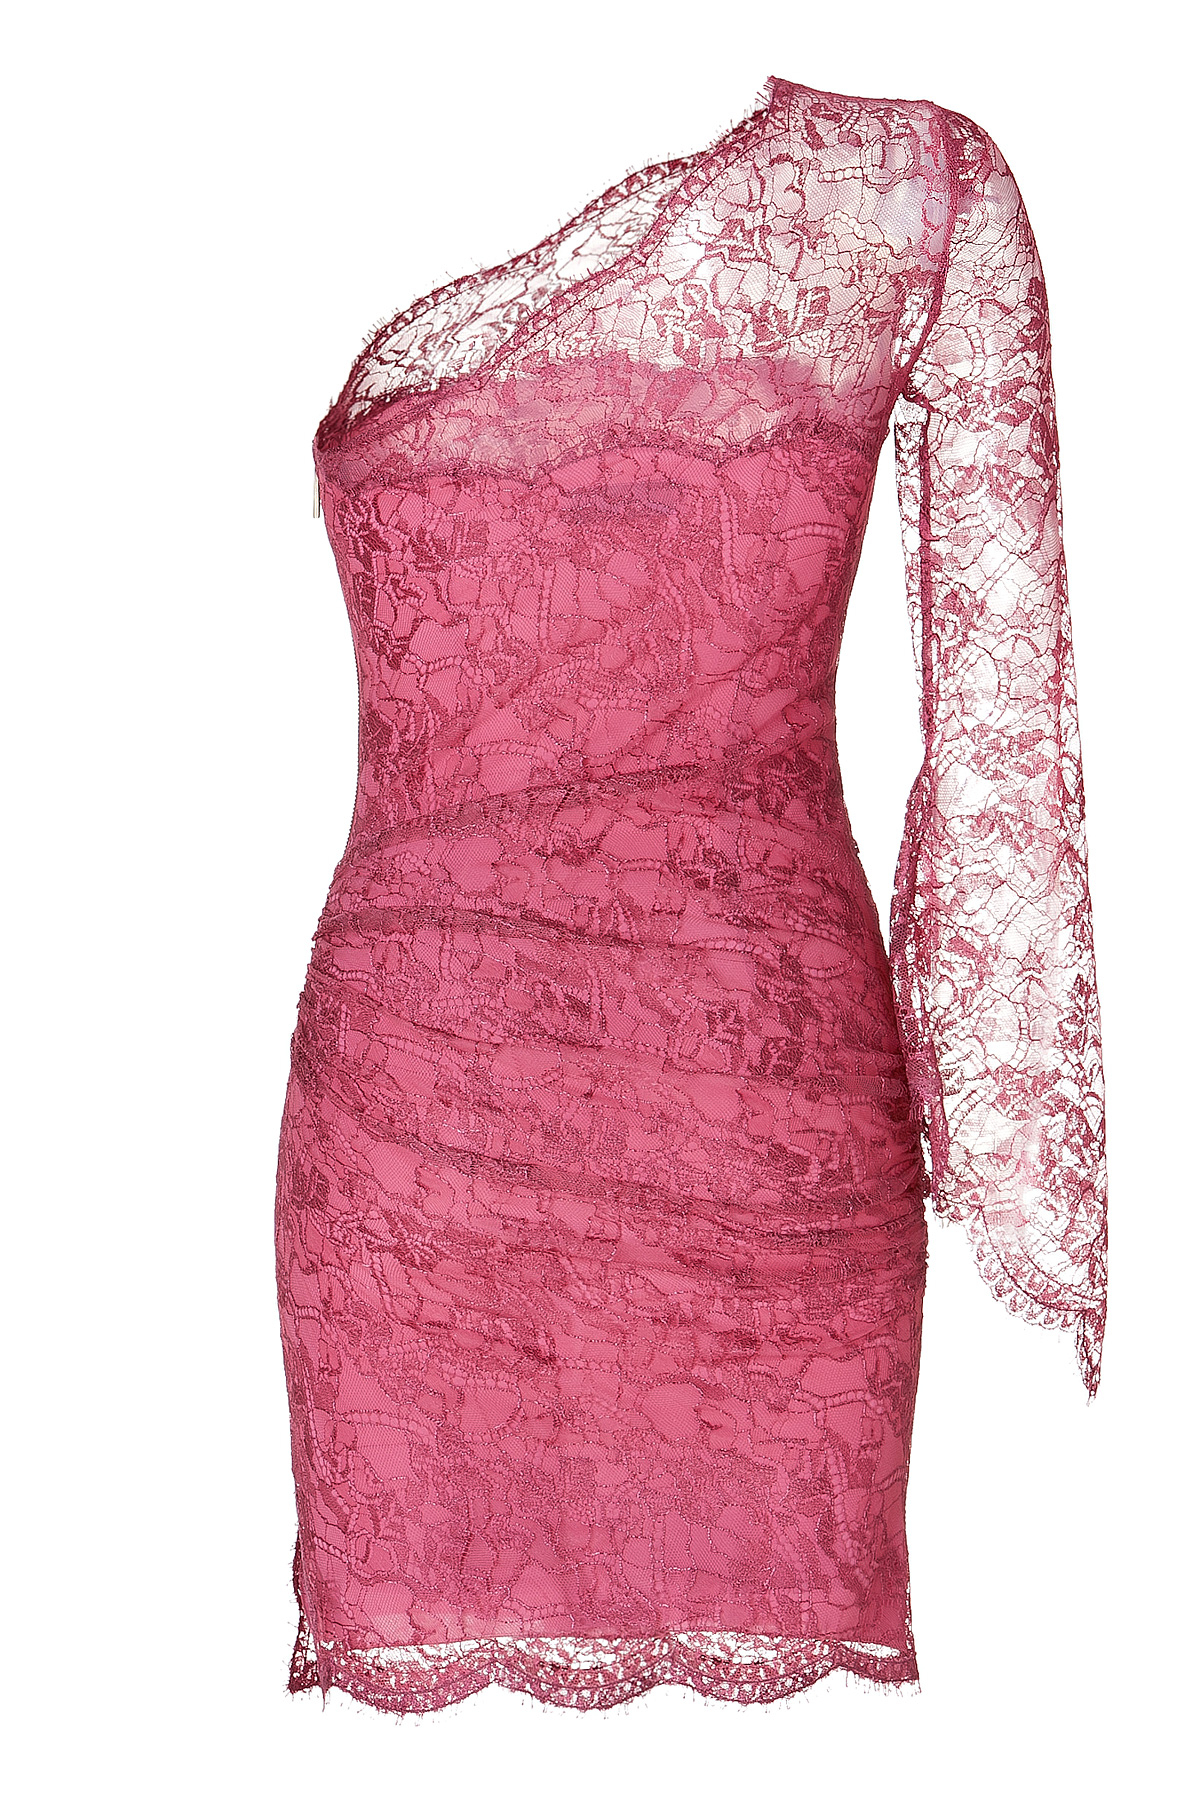 Lyst - Emilio pucci One Shoulder Lace Overlay Dress In Bordeaux in Pink